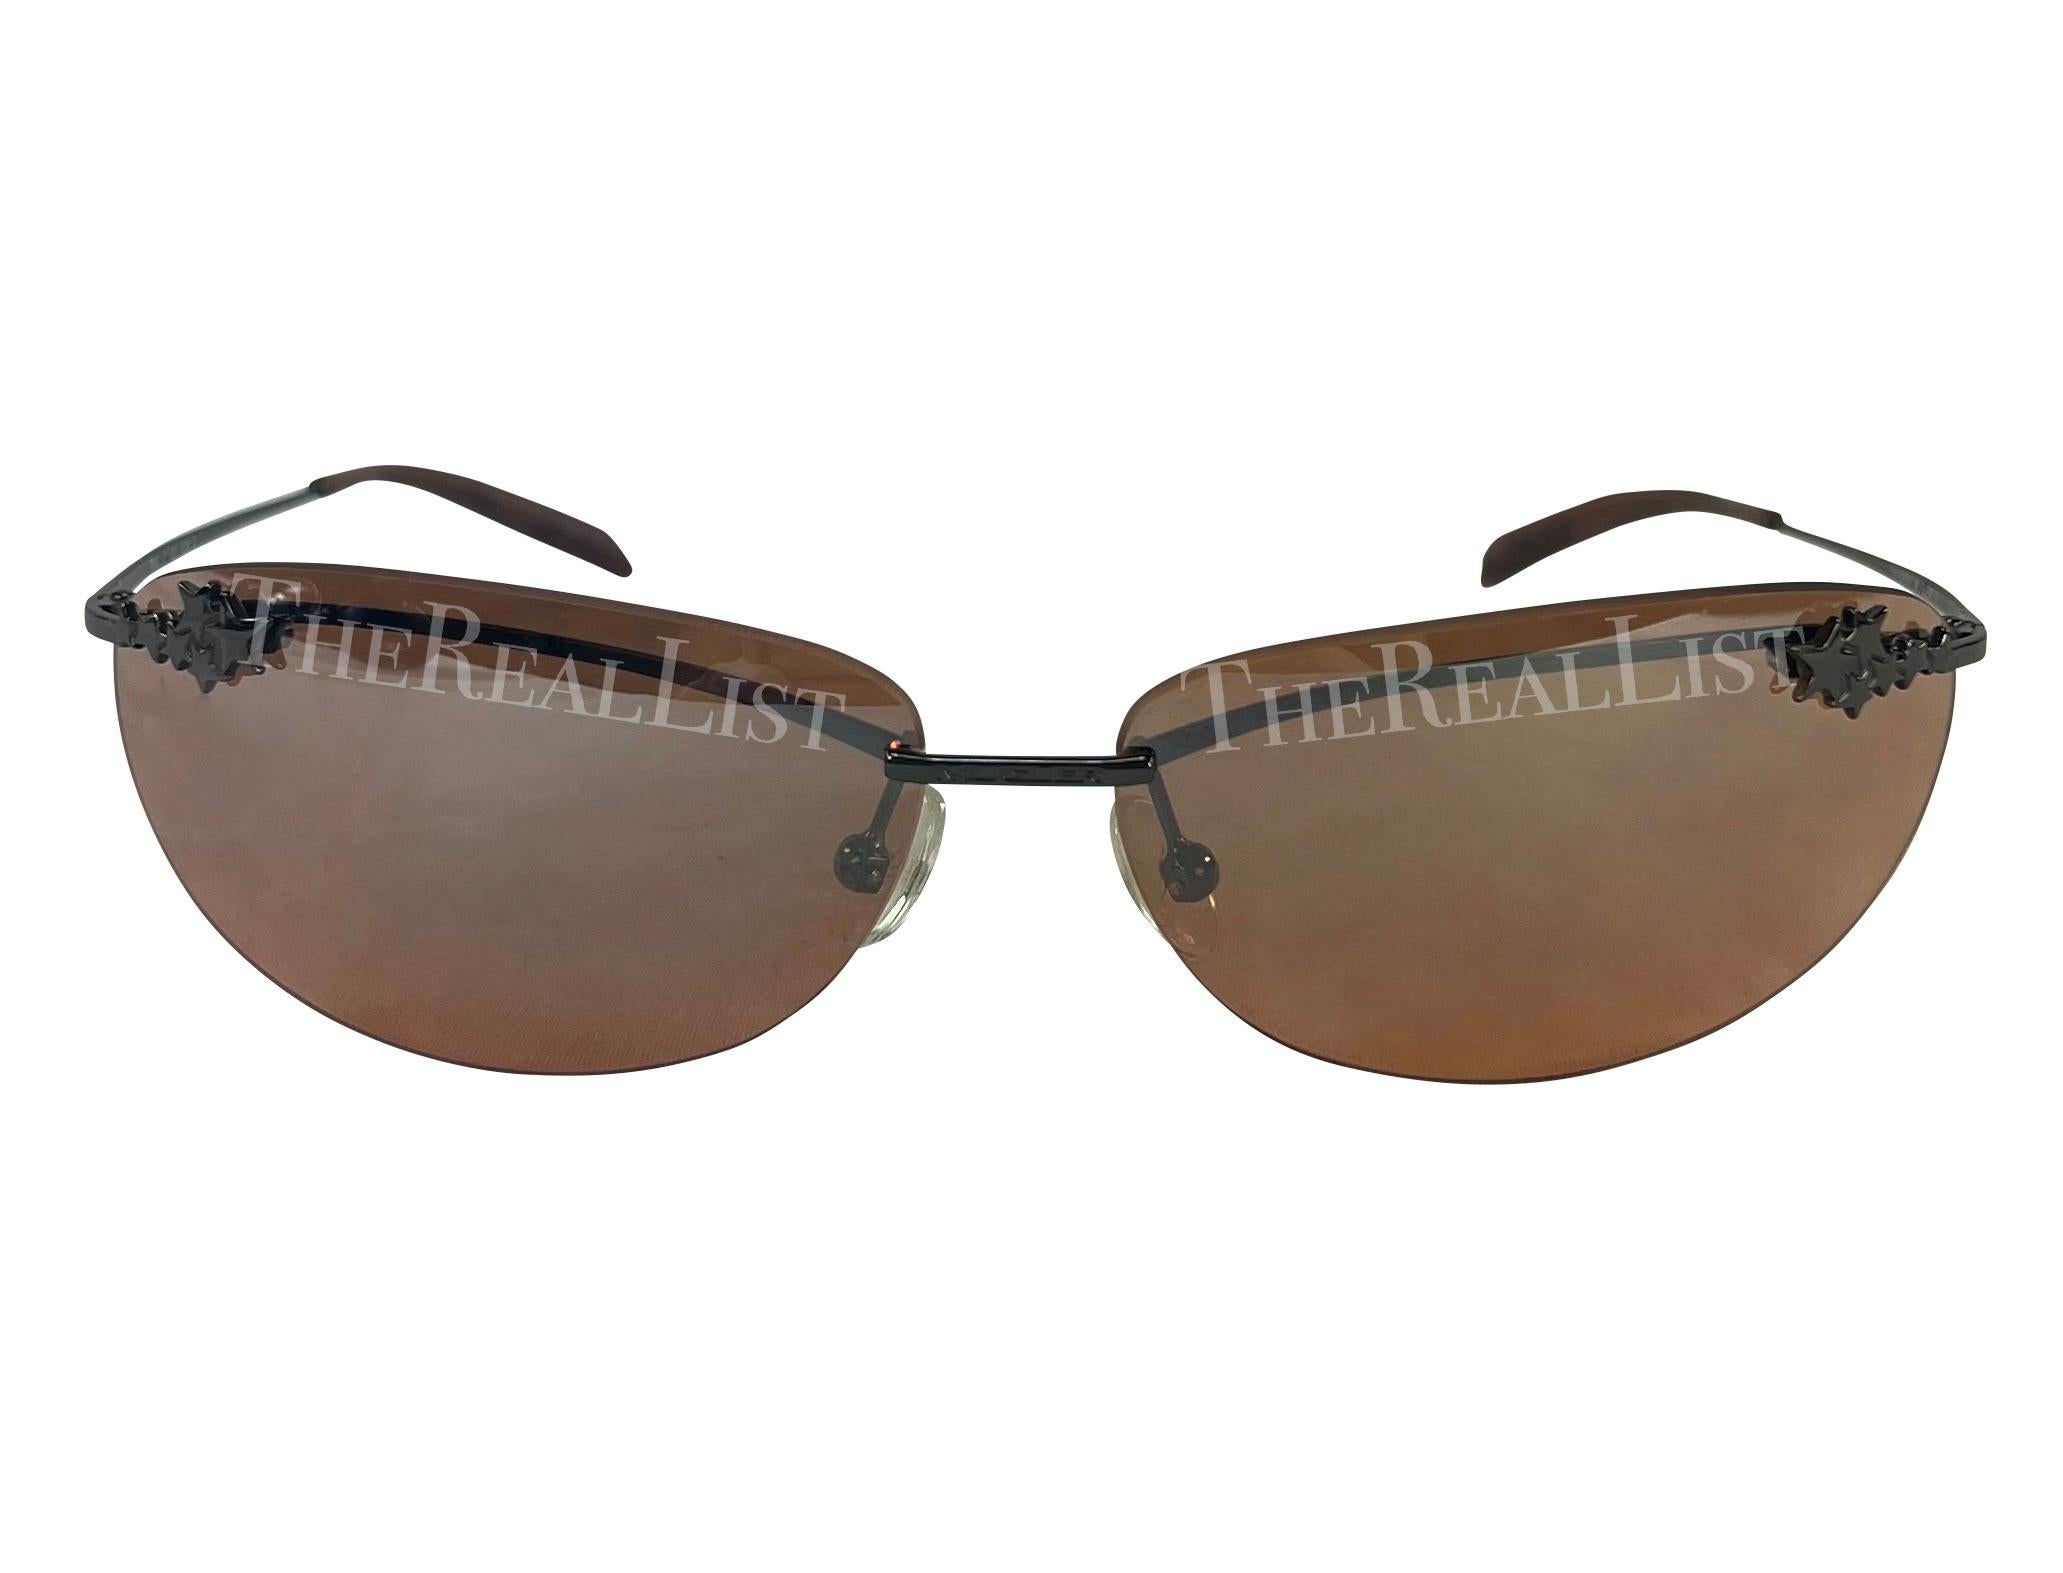 Early 2000s Thierry Mugler Brown Star Rimless Rectangular Sunglasses  In Excellent Condition For Sale In West Hollywood, CA